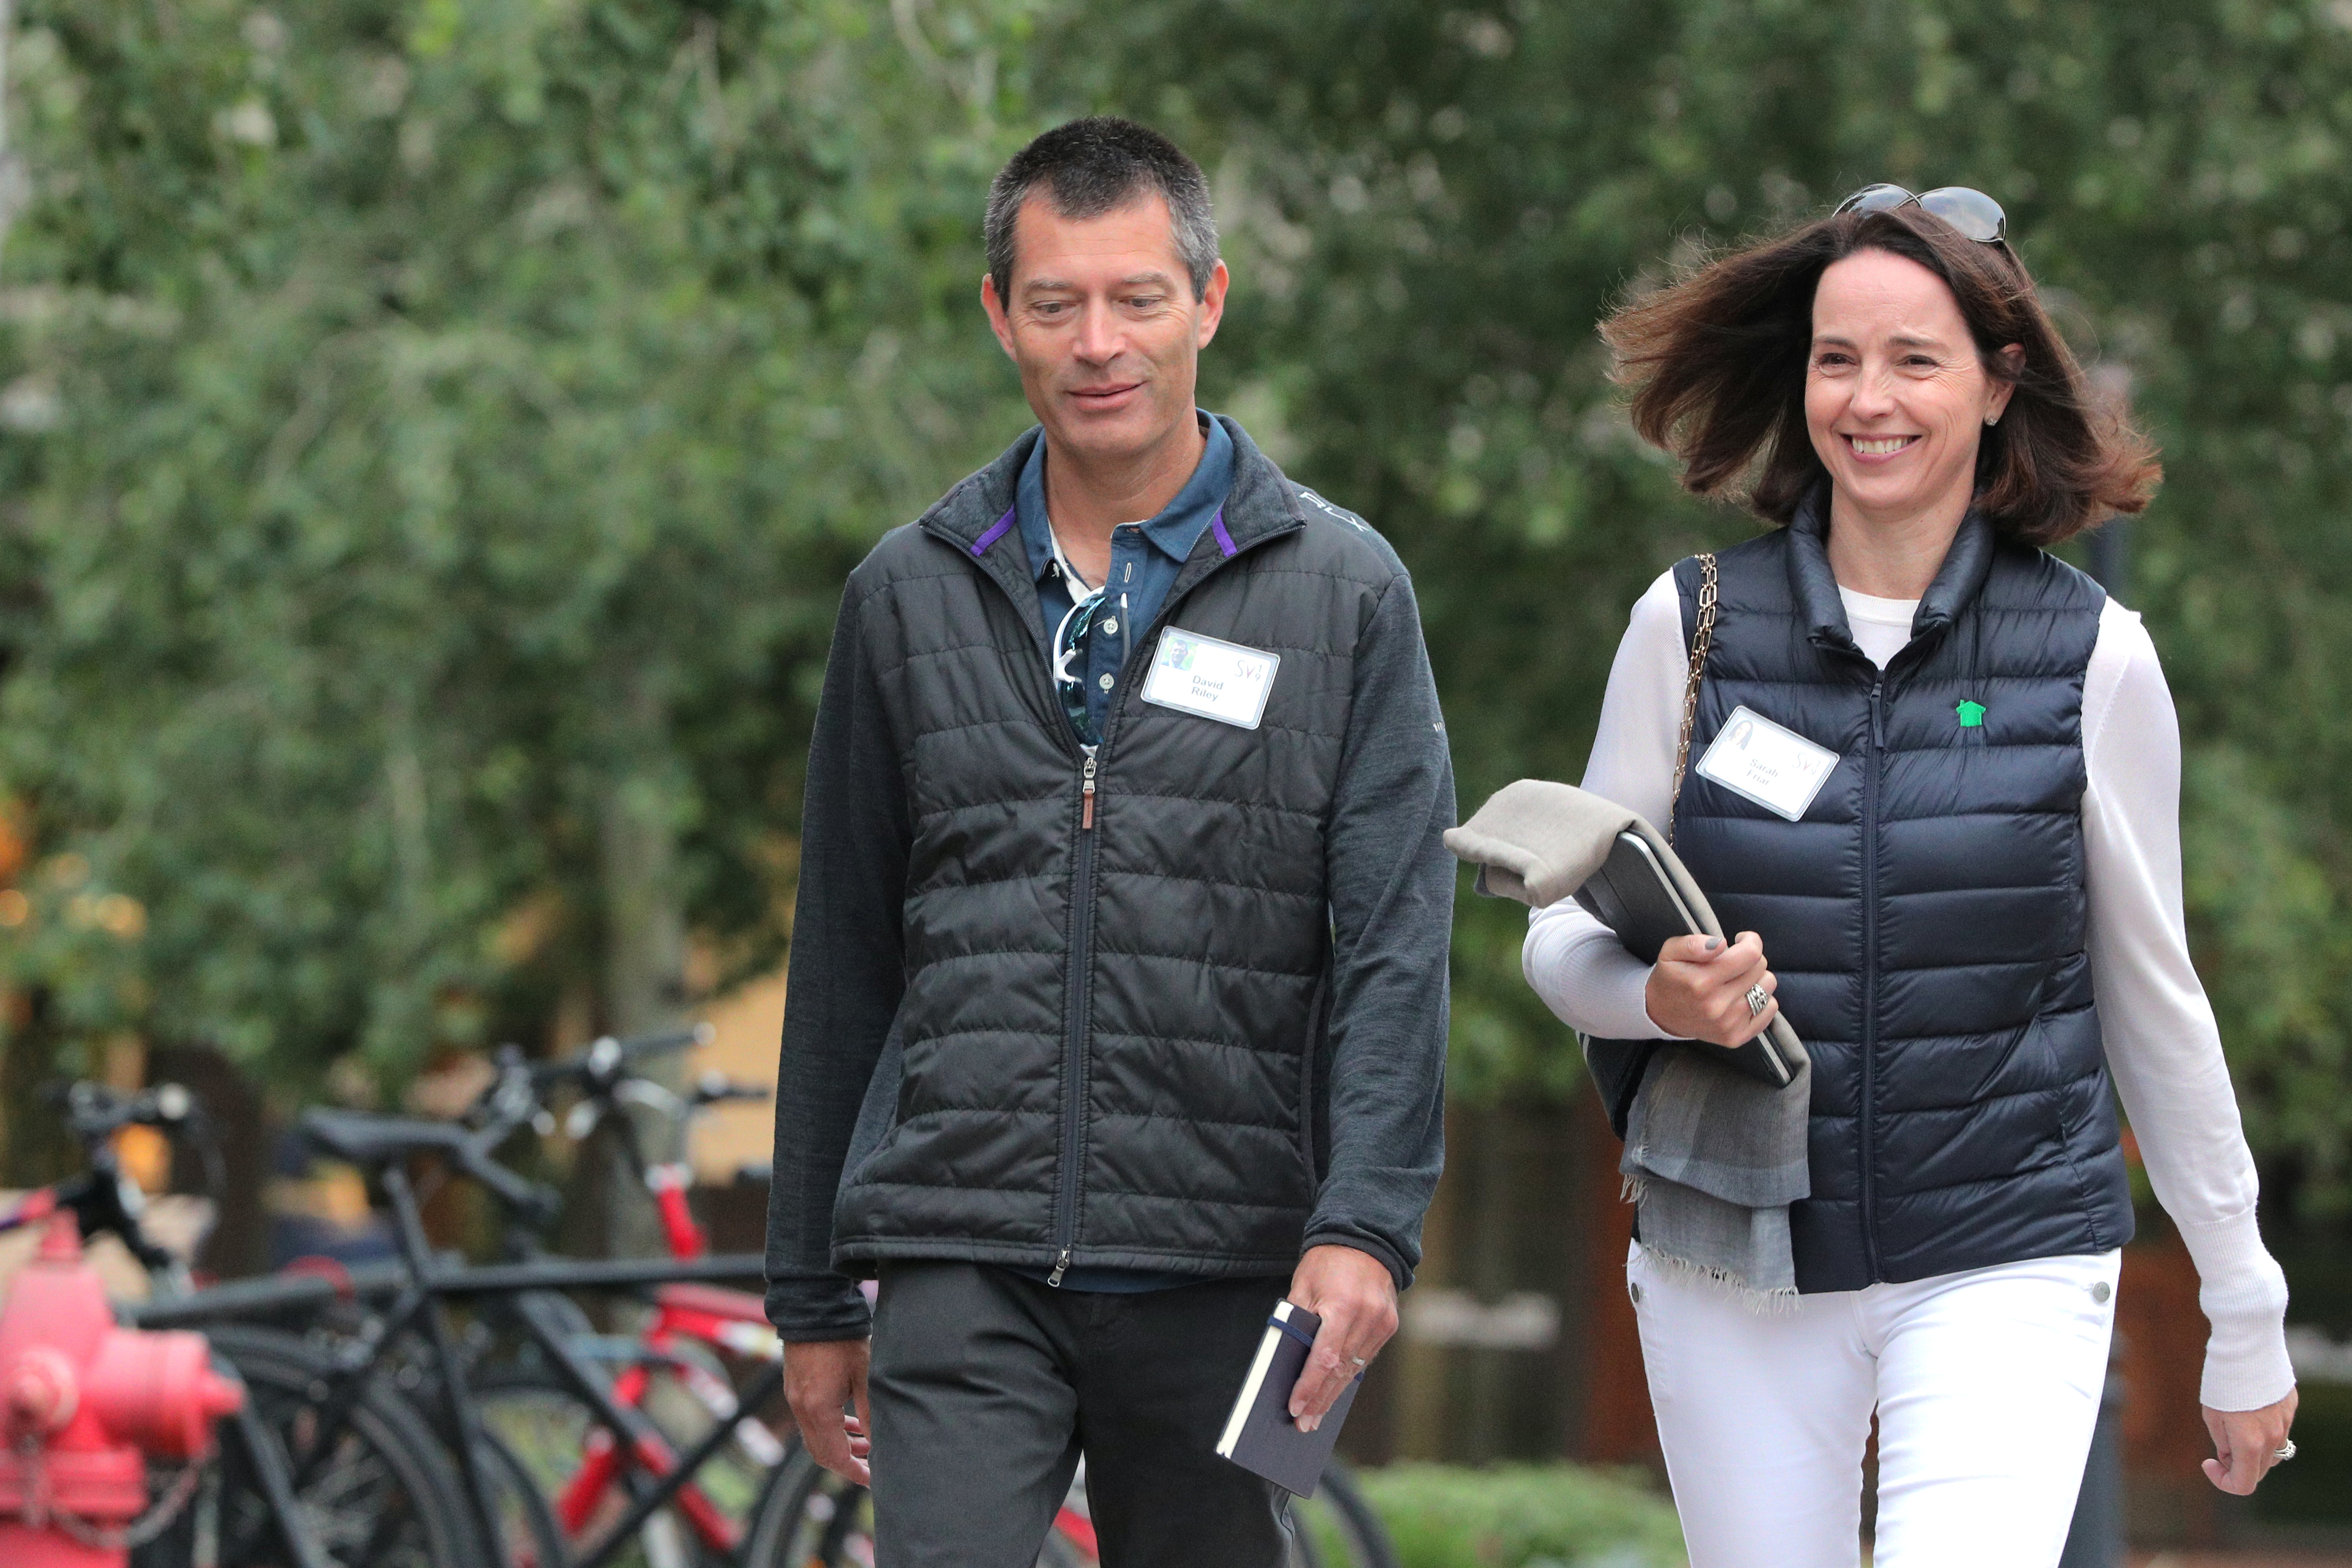 Sarah Friar, CEO of Nextdoor, and David Riley attend the annual Allen and Co. Sun Valley media conference in Sun Valley, Idaho